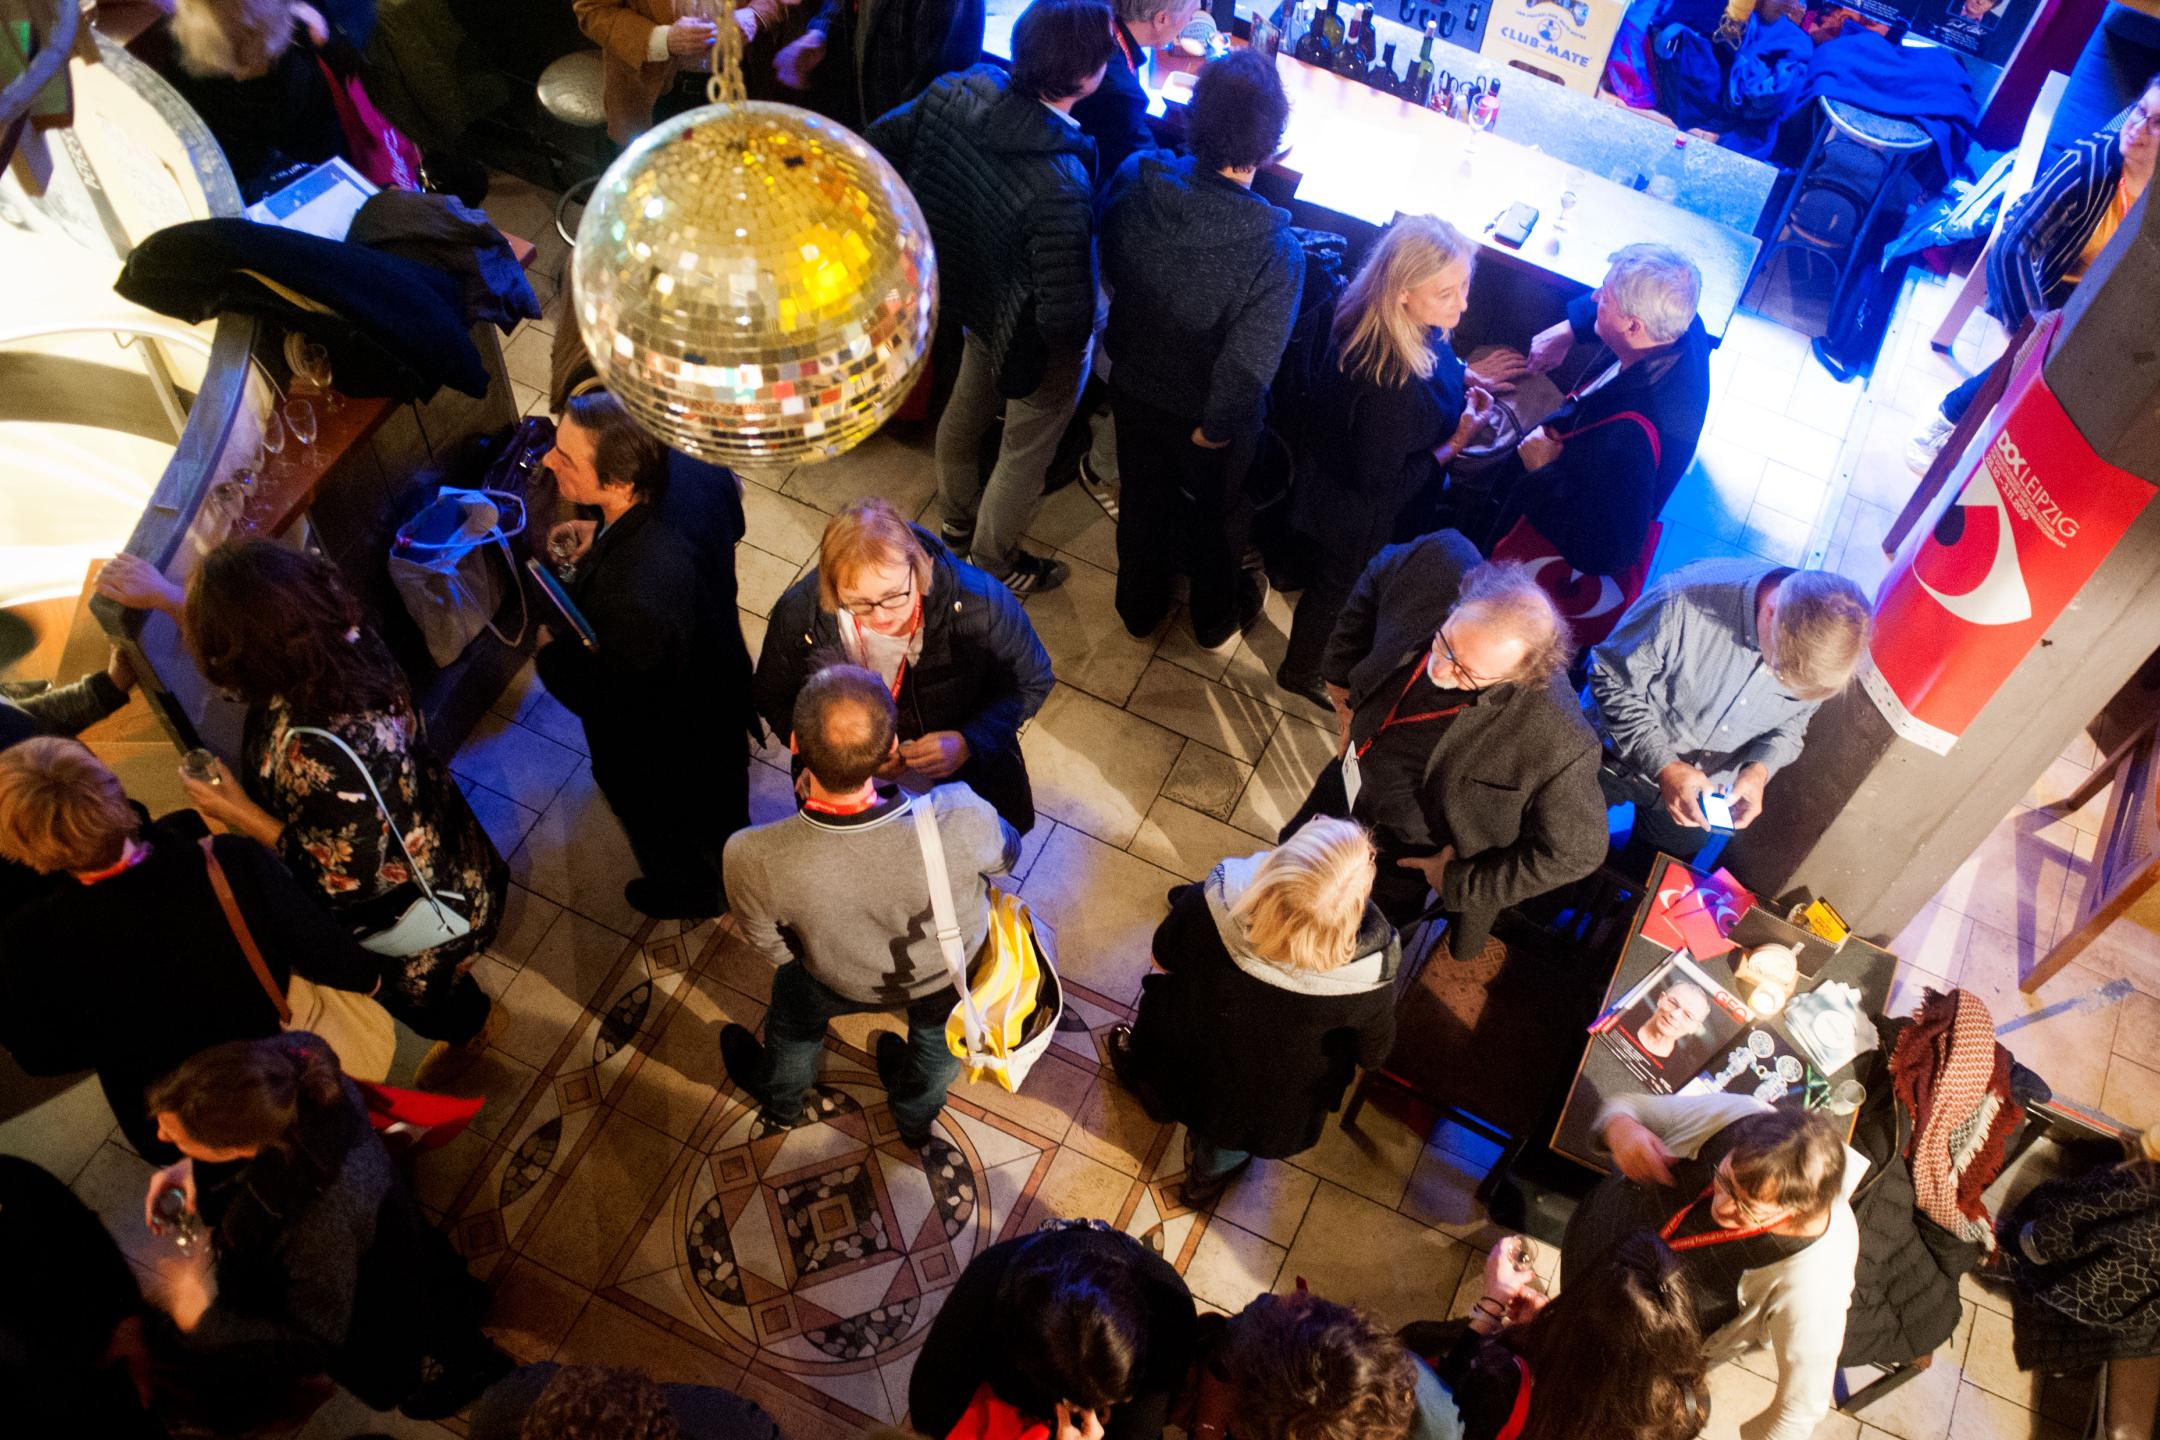 A business cocktail hour from a bird’s eye view: about 20 people standing in small groups and chatting, some are holding glasses, some are ordering at the bar. 